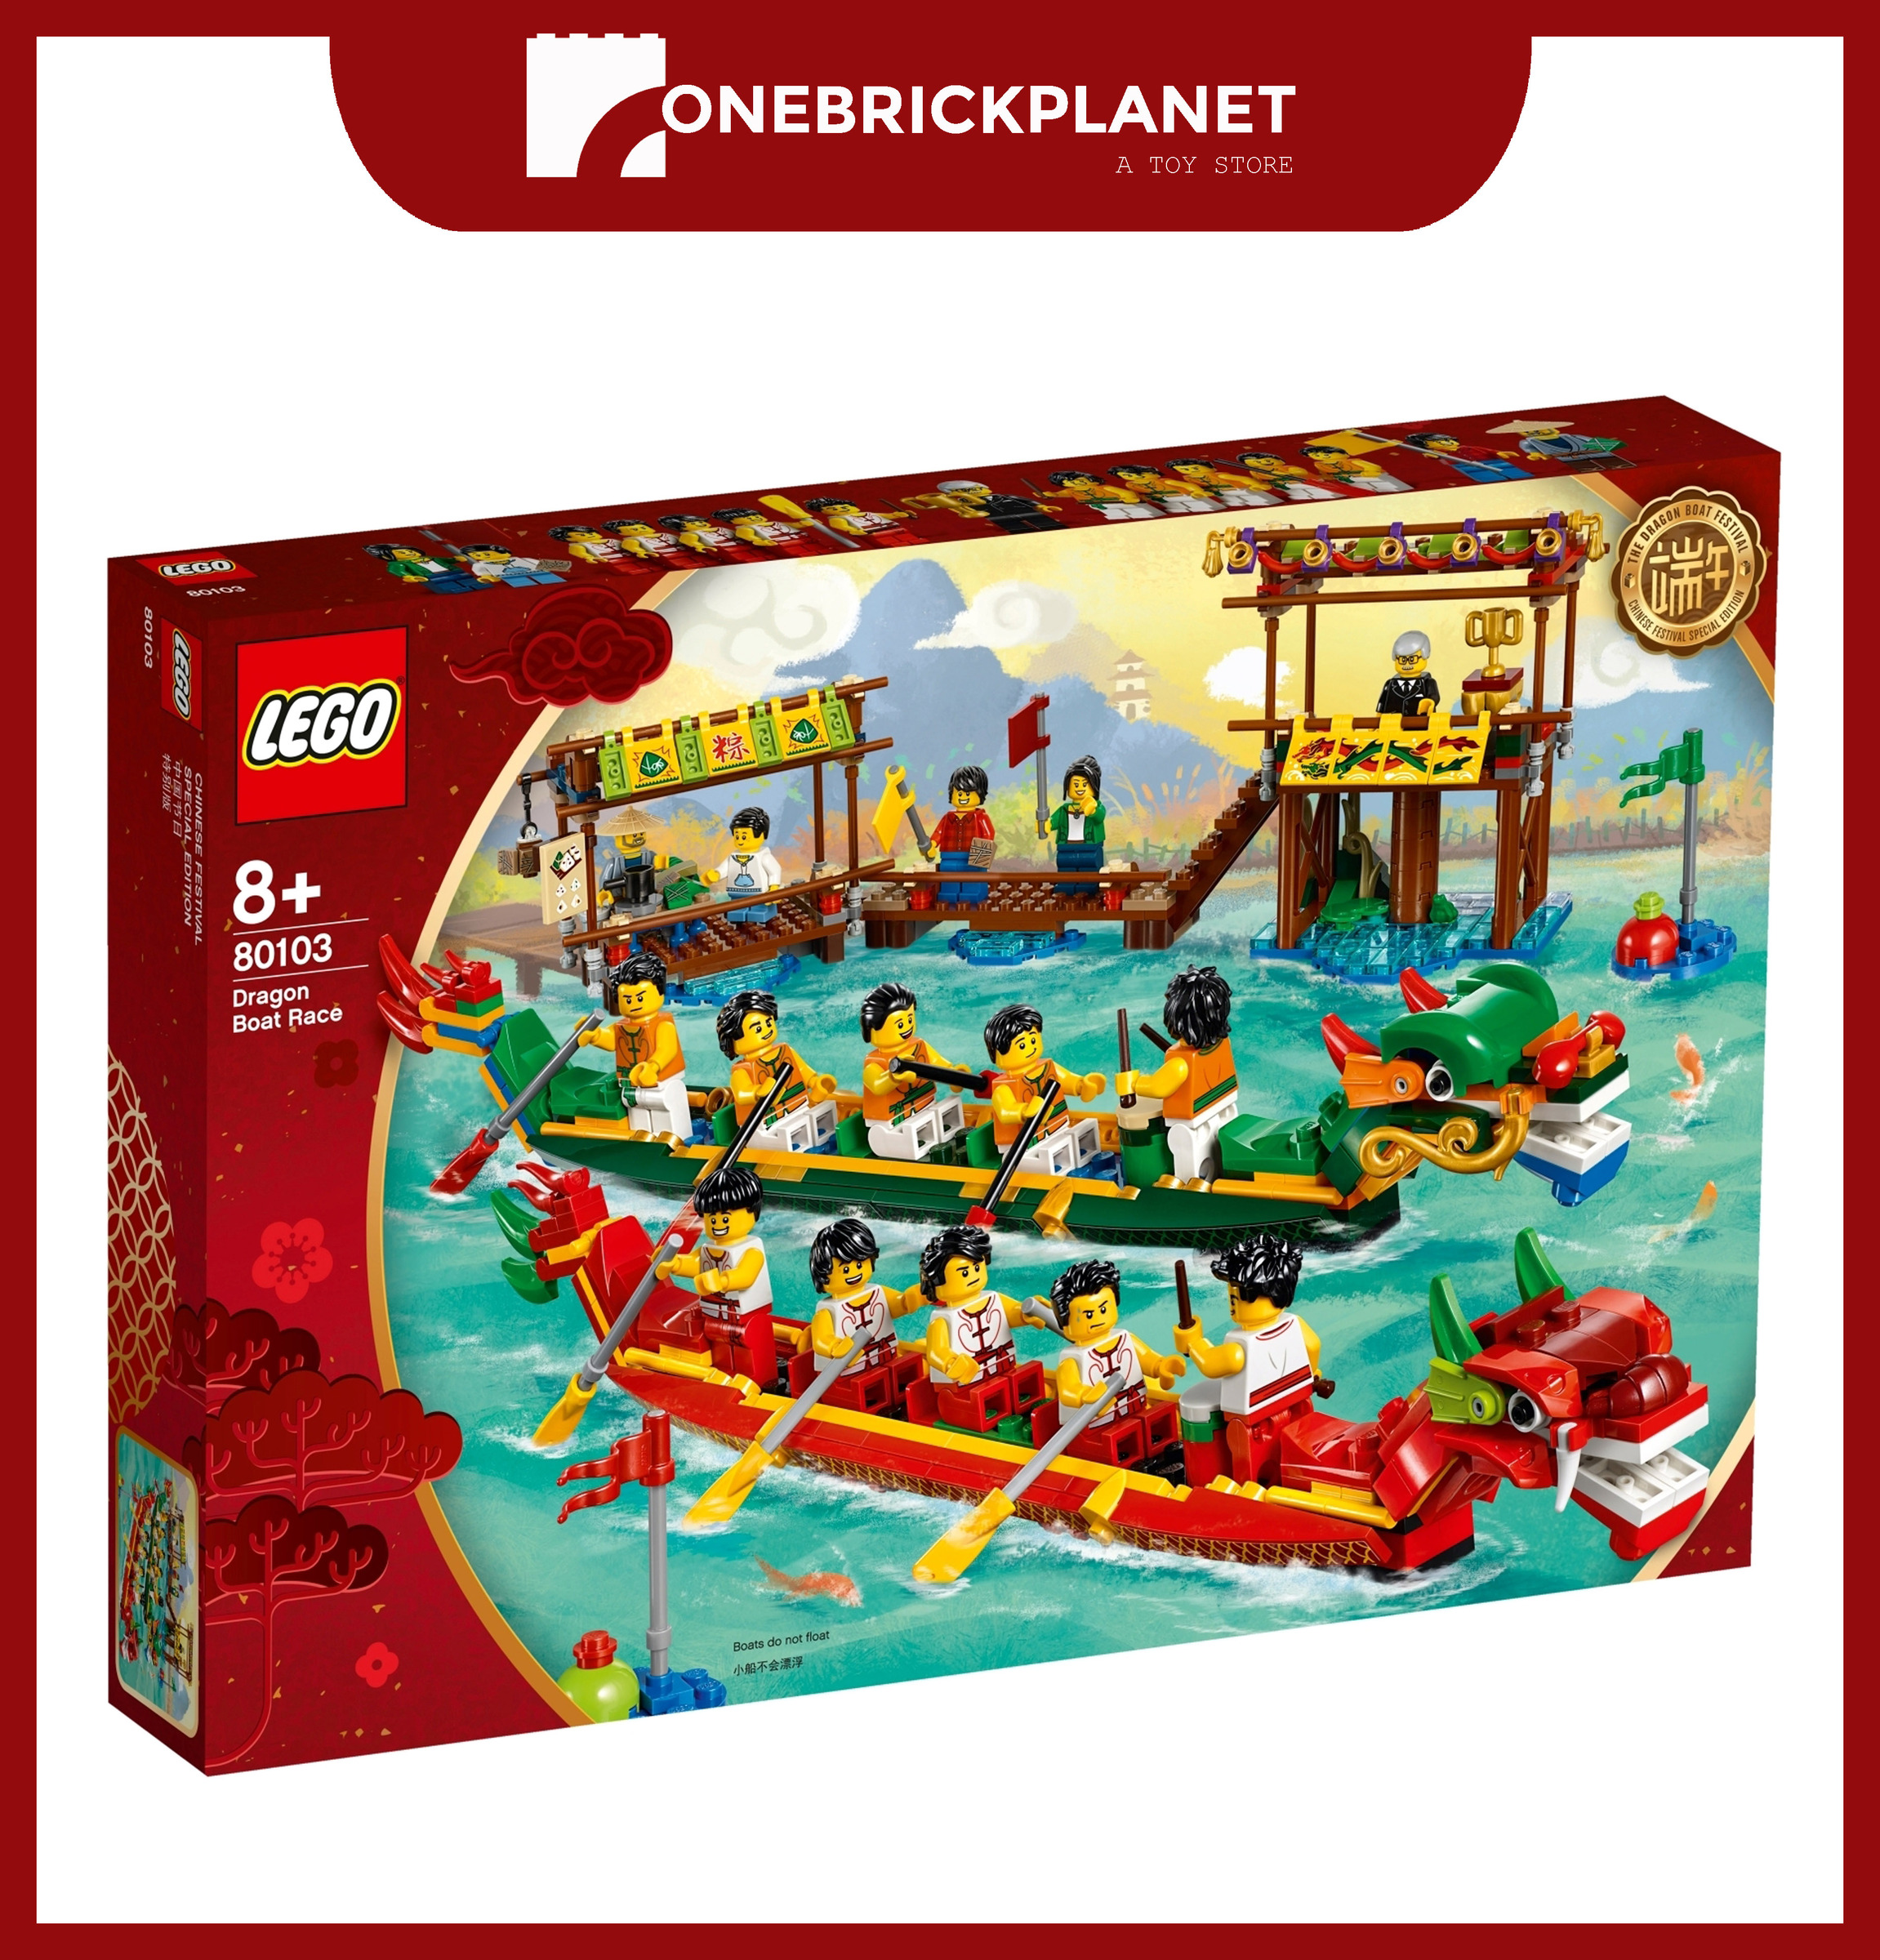 LEGO 80103 Chinese Festival - Dragon Boat Race – One Brick Planet